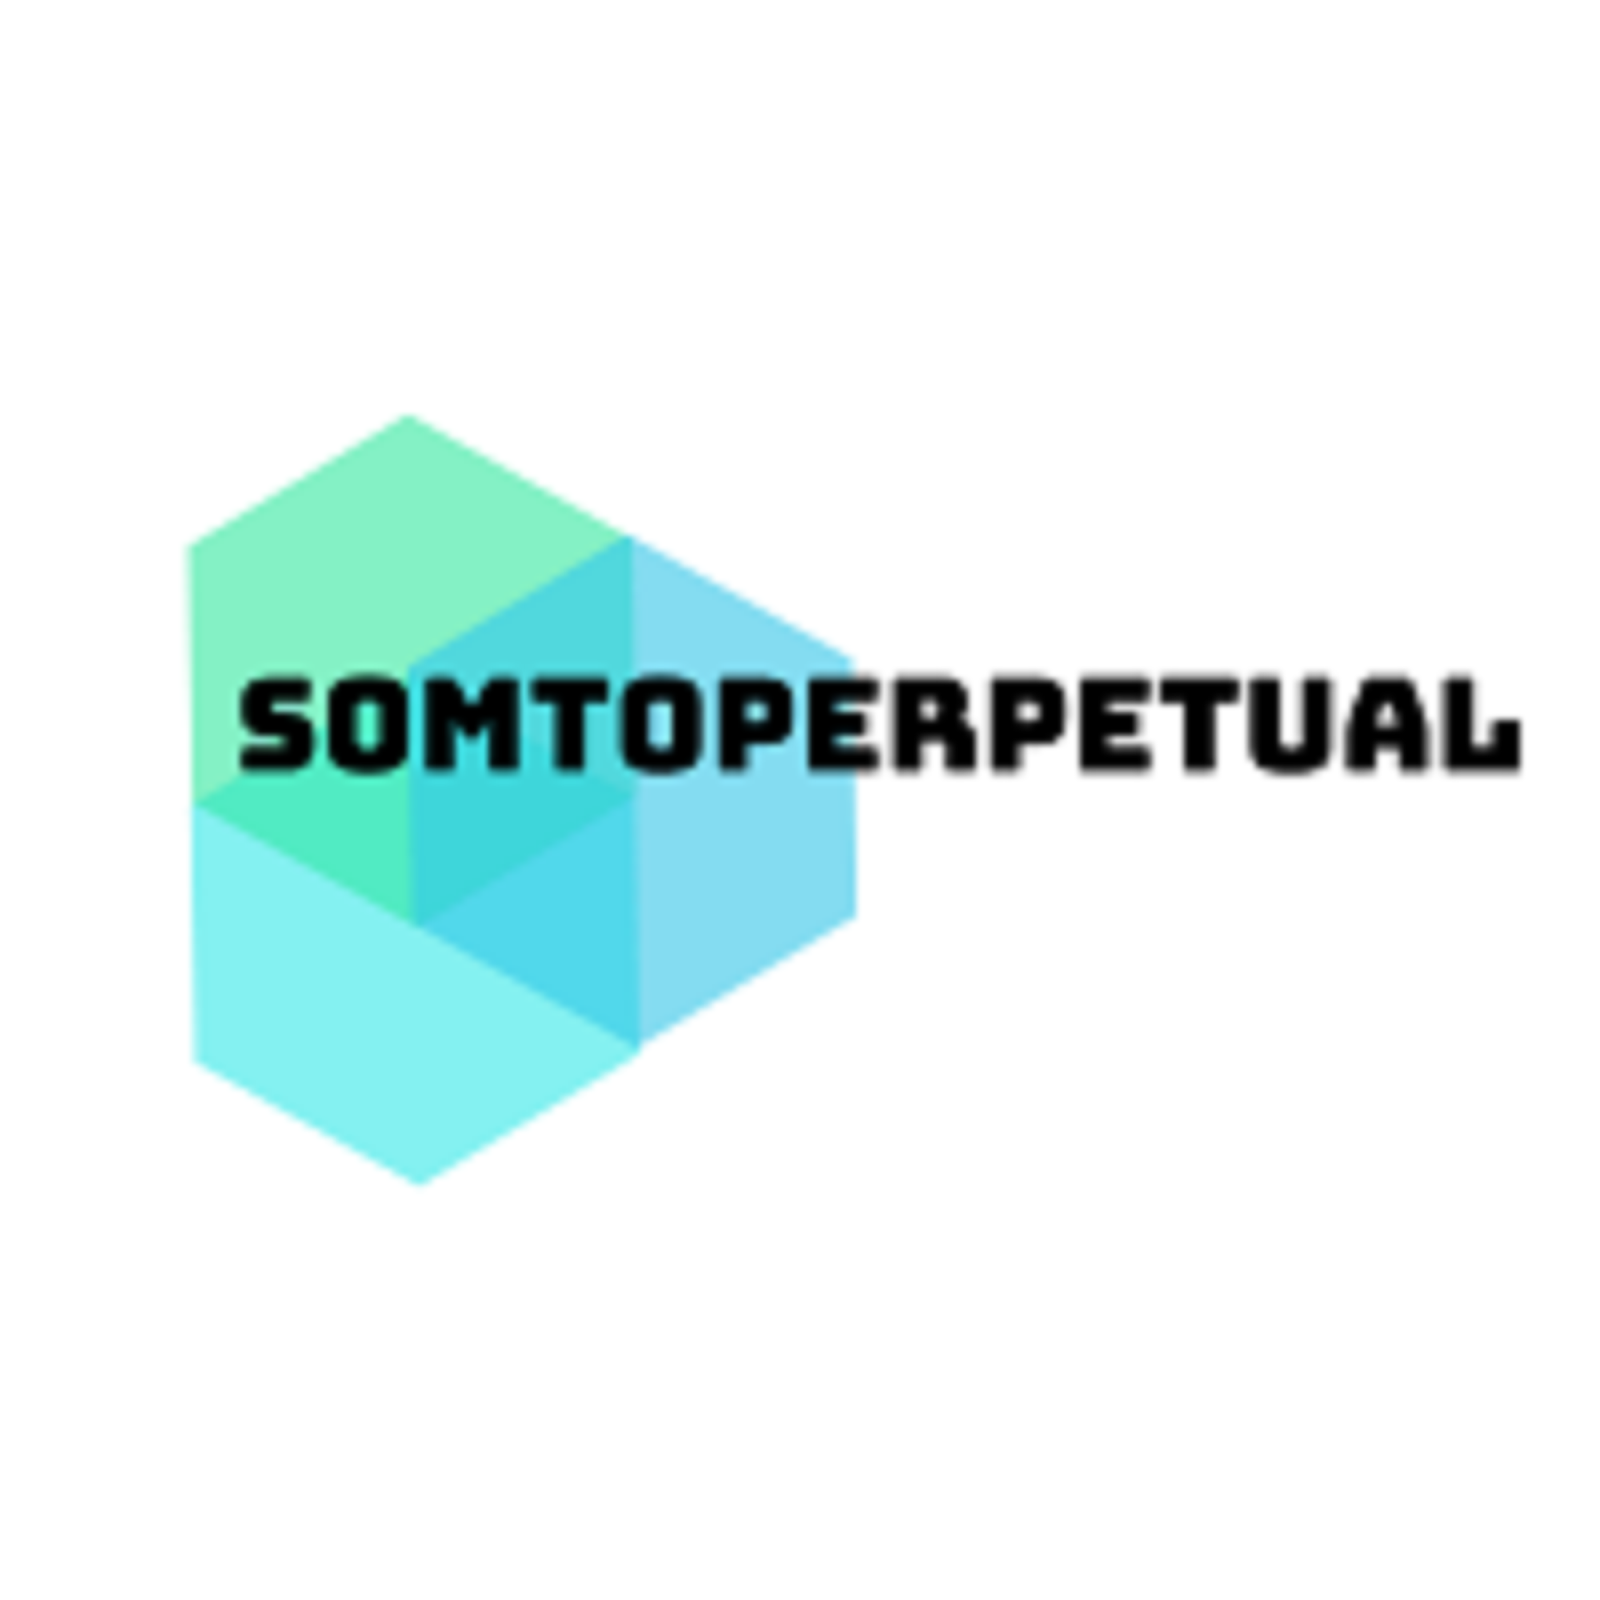 Somto Perpetual